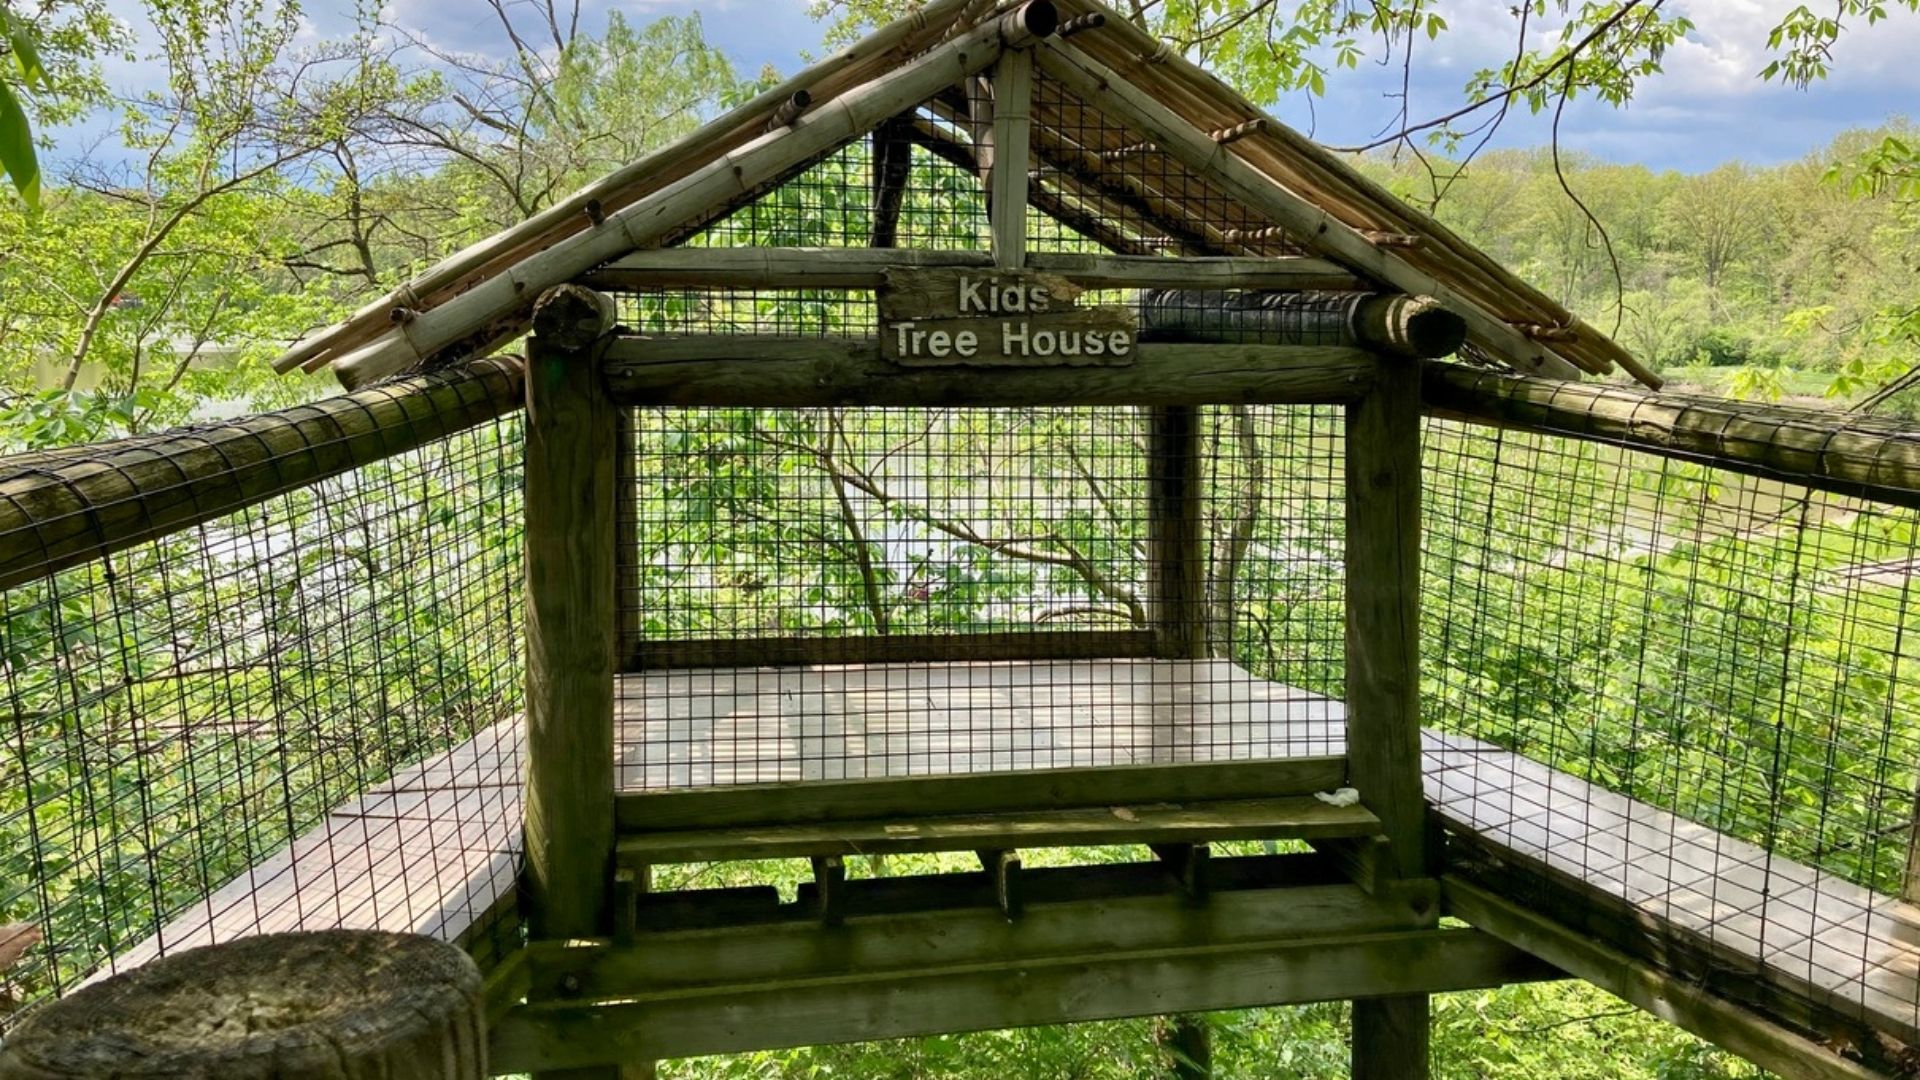 A children's tree house at the Fort Wayne Zoo